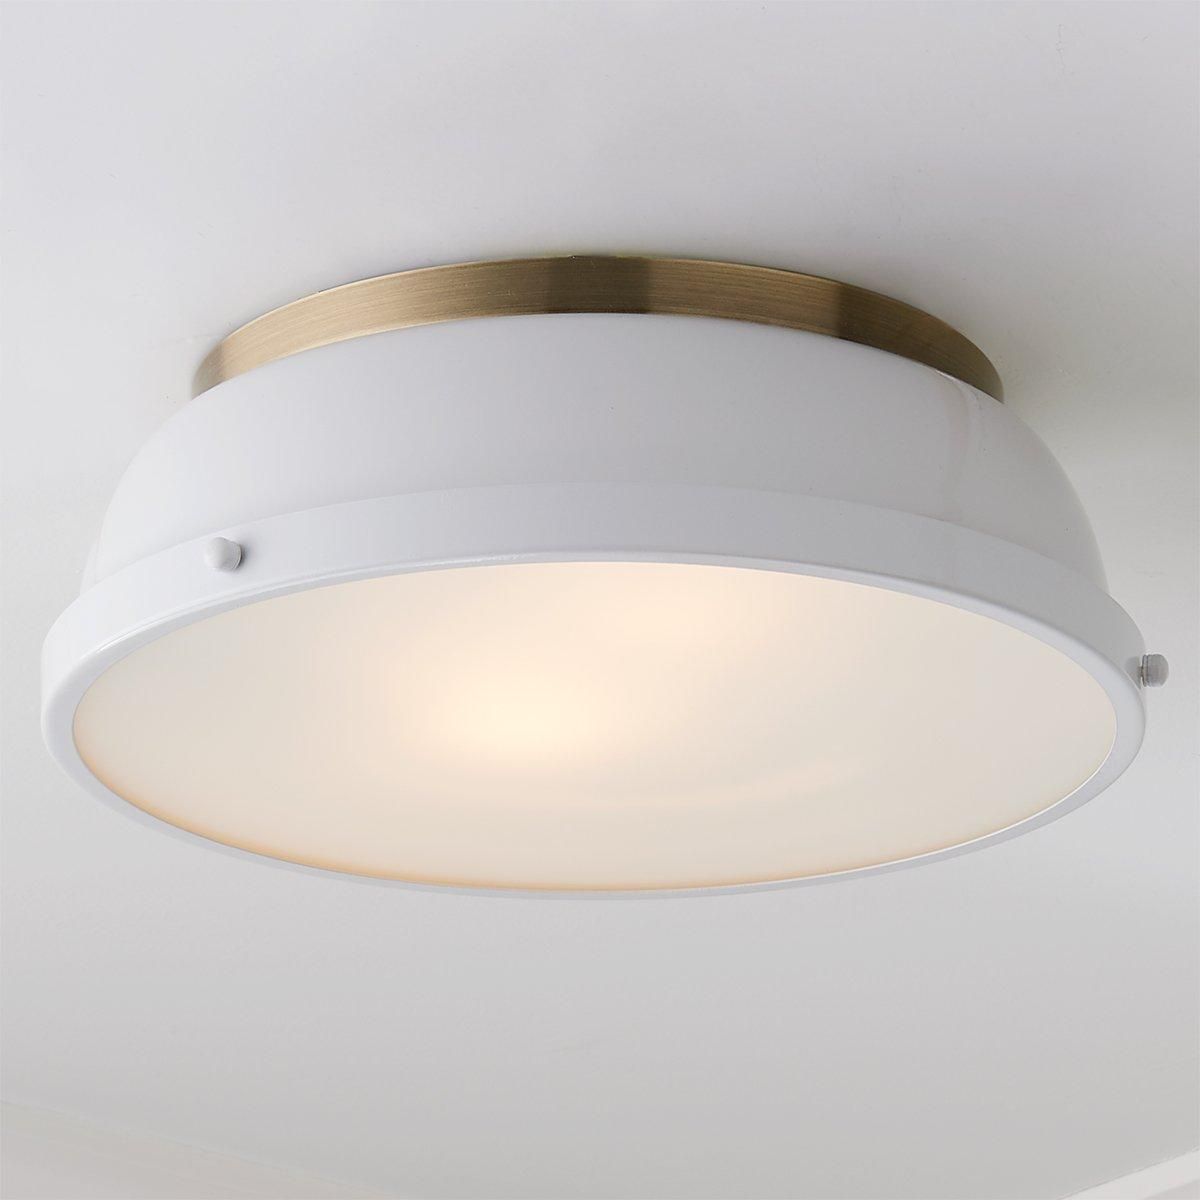 Classic Dome Enameled Ceiling Light | Shades of Light